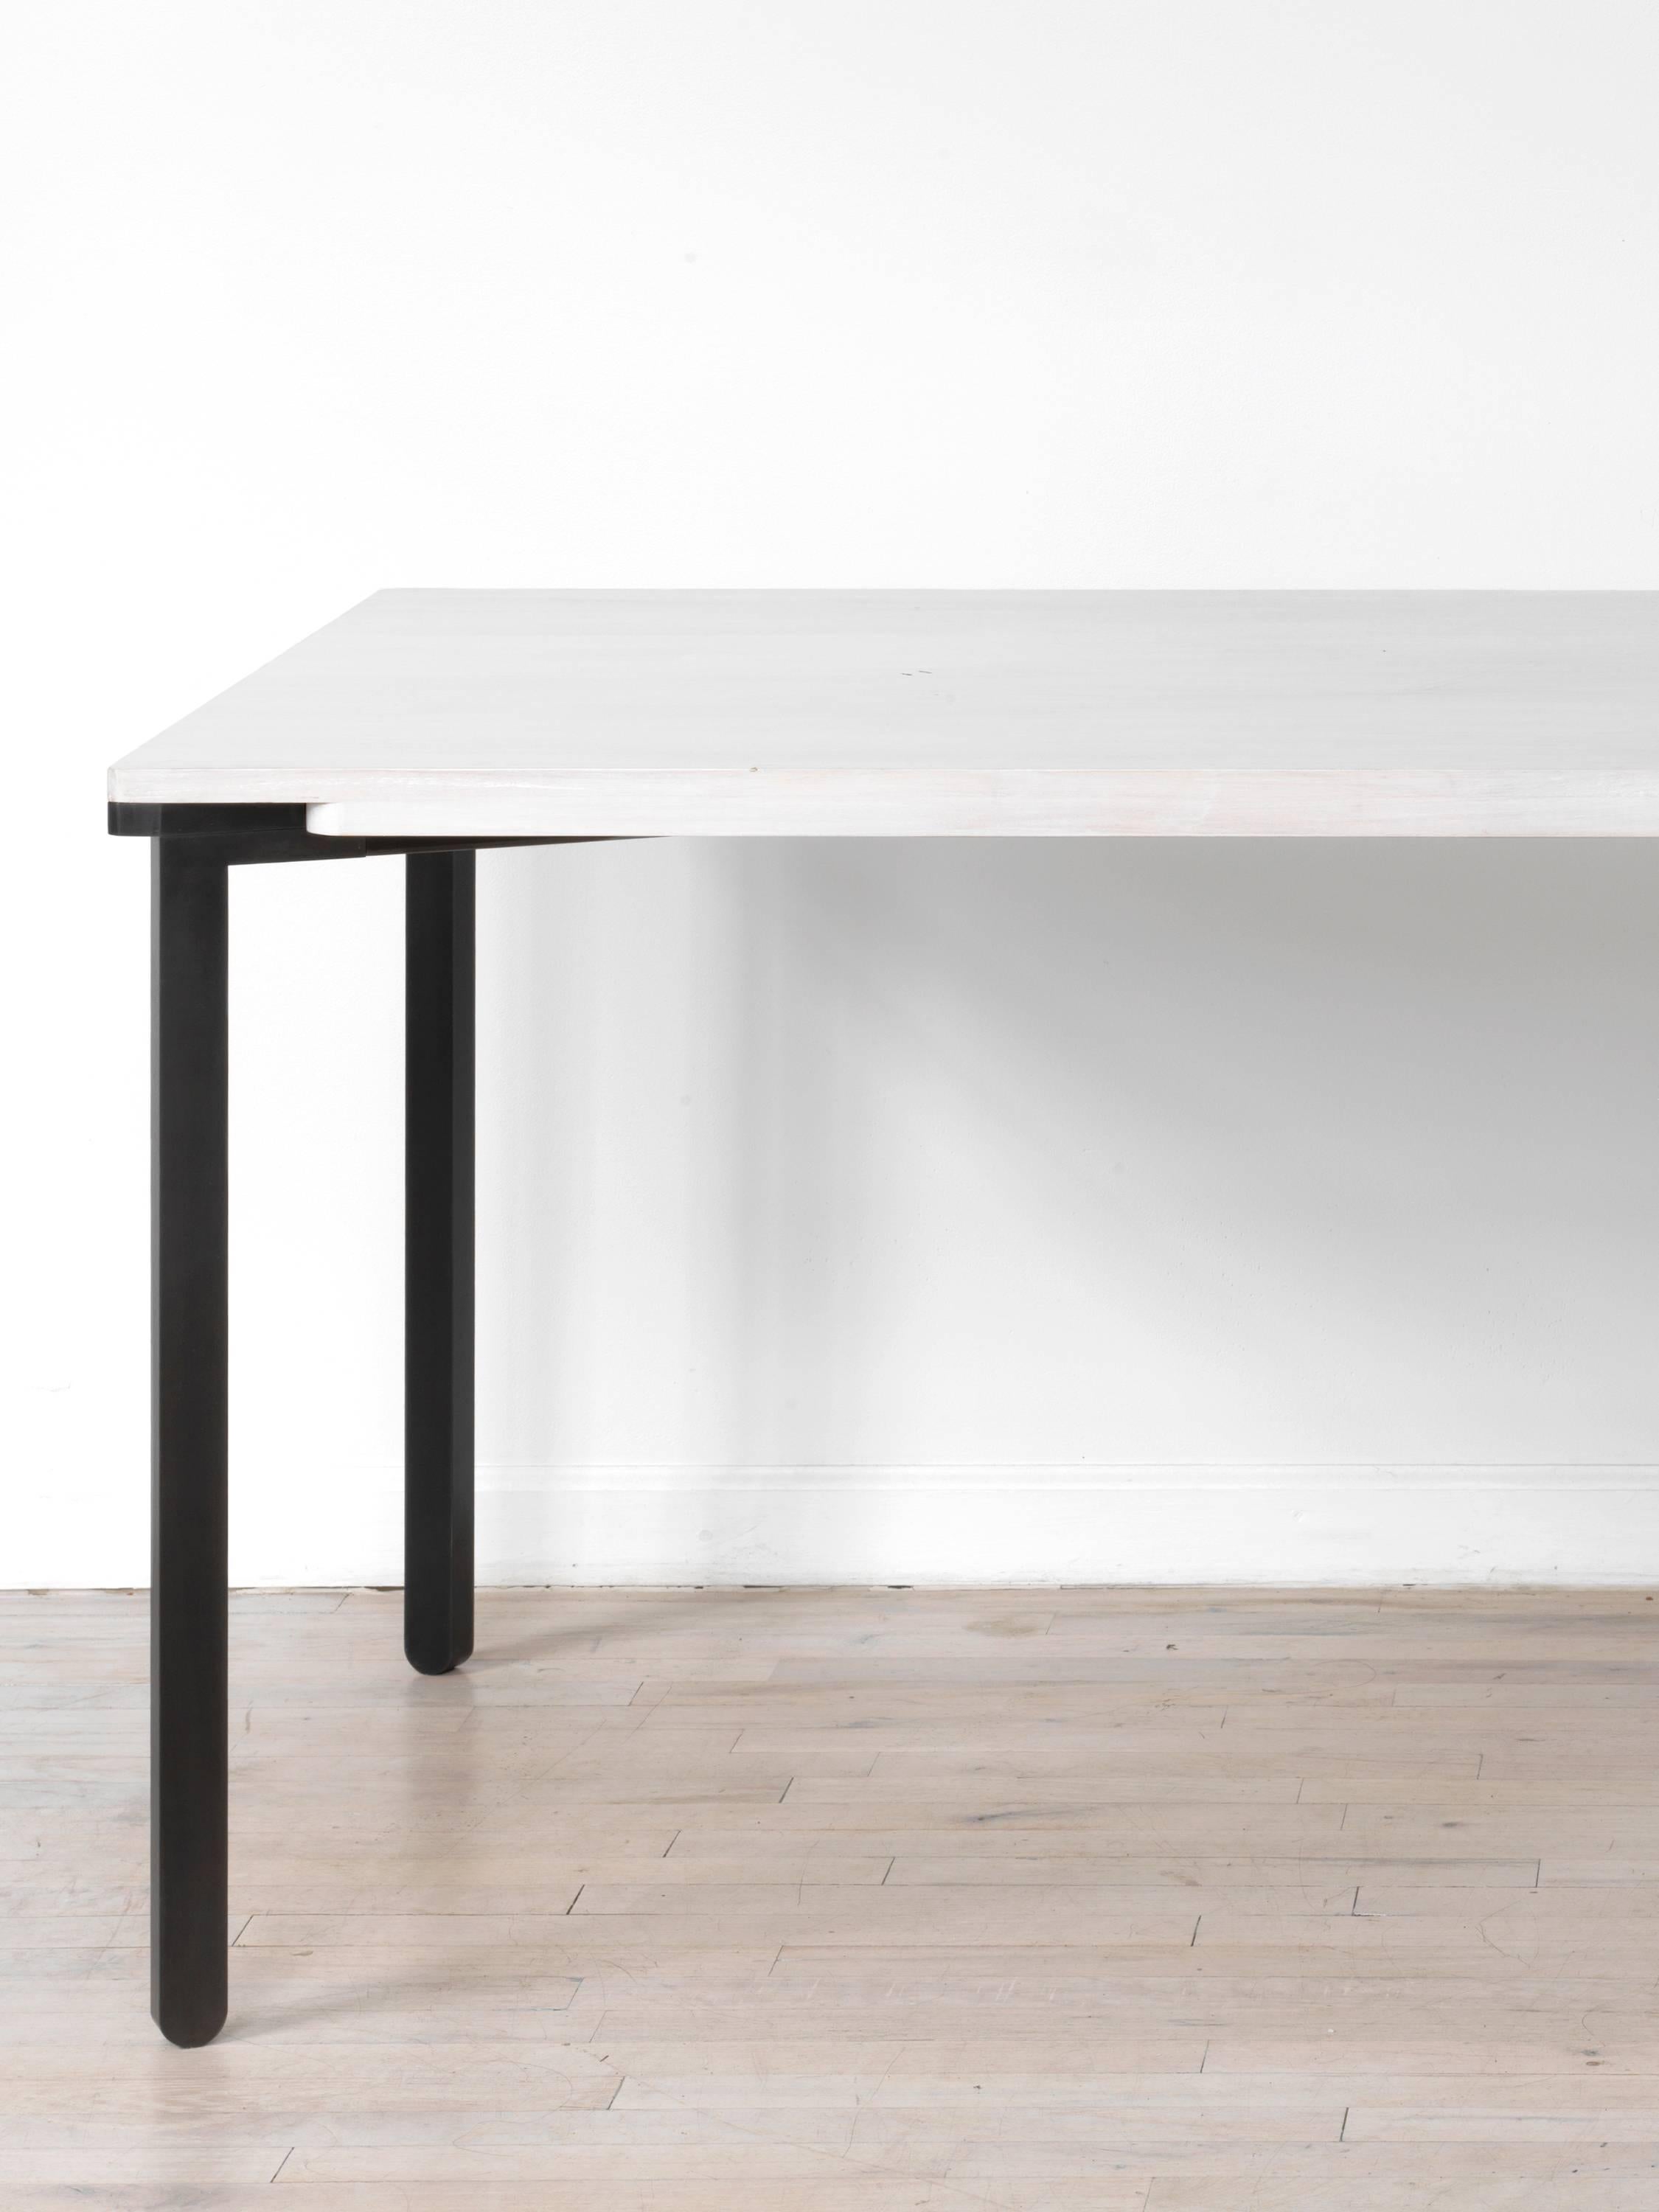 American Bow Tie Table in Contemporary Blackened Steel and White Washed Maple For Sale